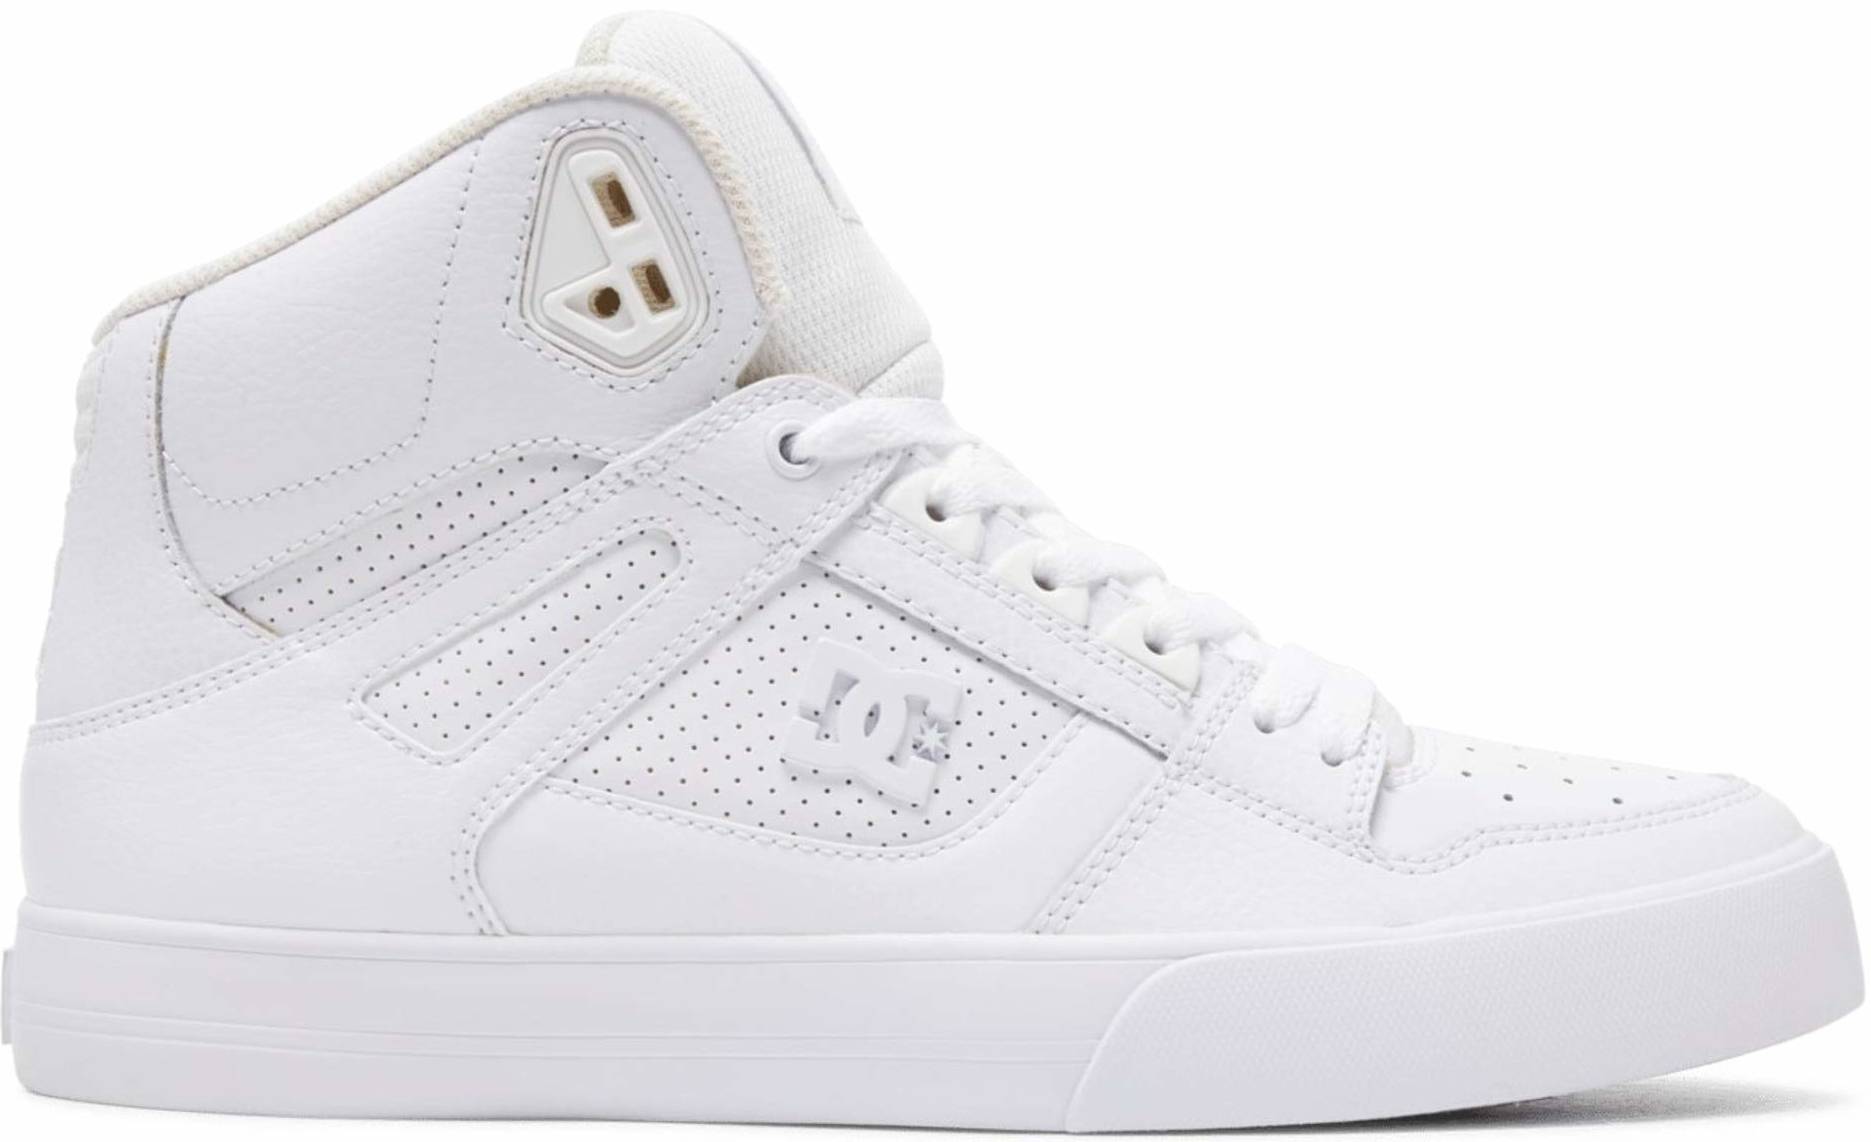 mens high top tennis shoes with velcro